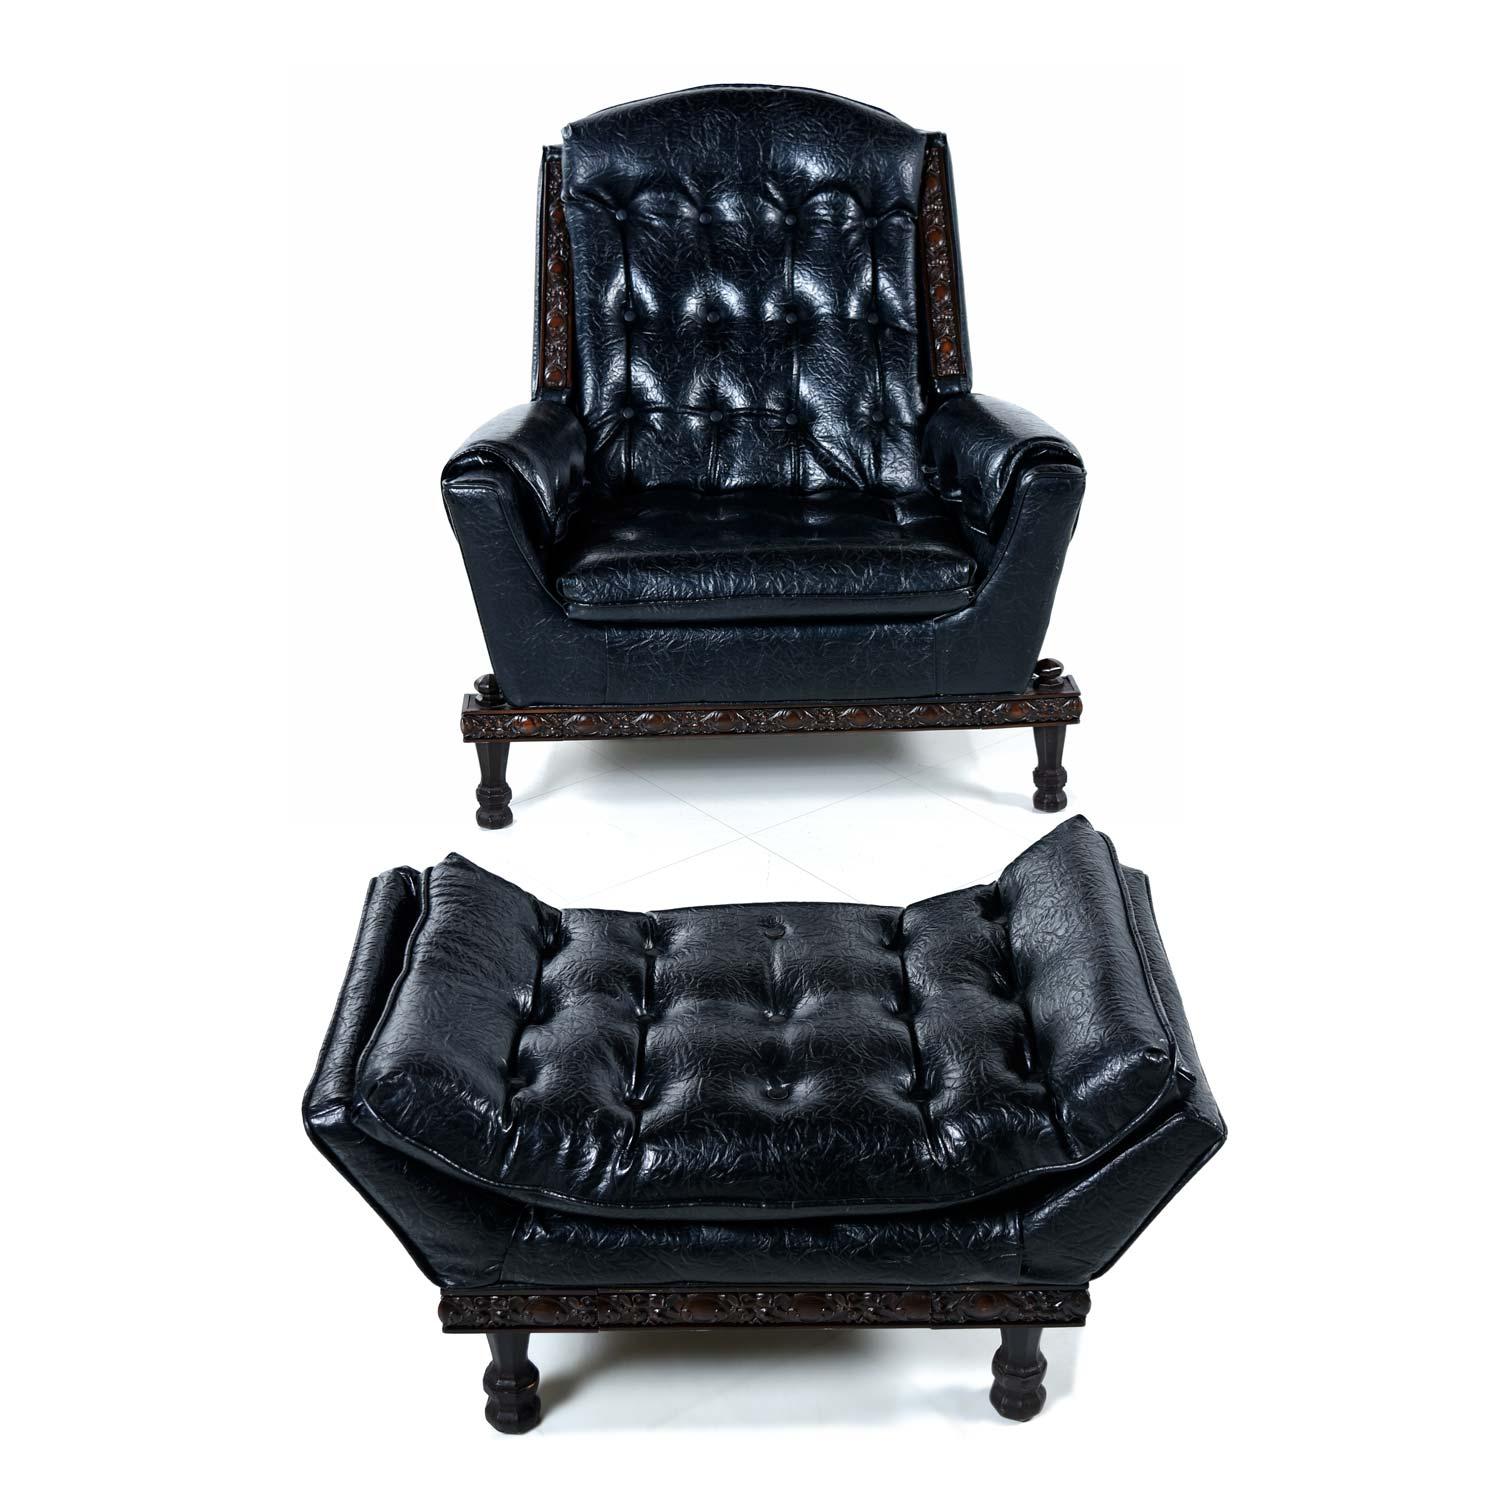 If you are looking for the perfect chair for your man cave, look no more. This thing oozes machismo with it’s original, heavily textured black vinyl upholstery and ornately carved solid wood trim. This handsome recliner isn’t all looks. The wide,